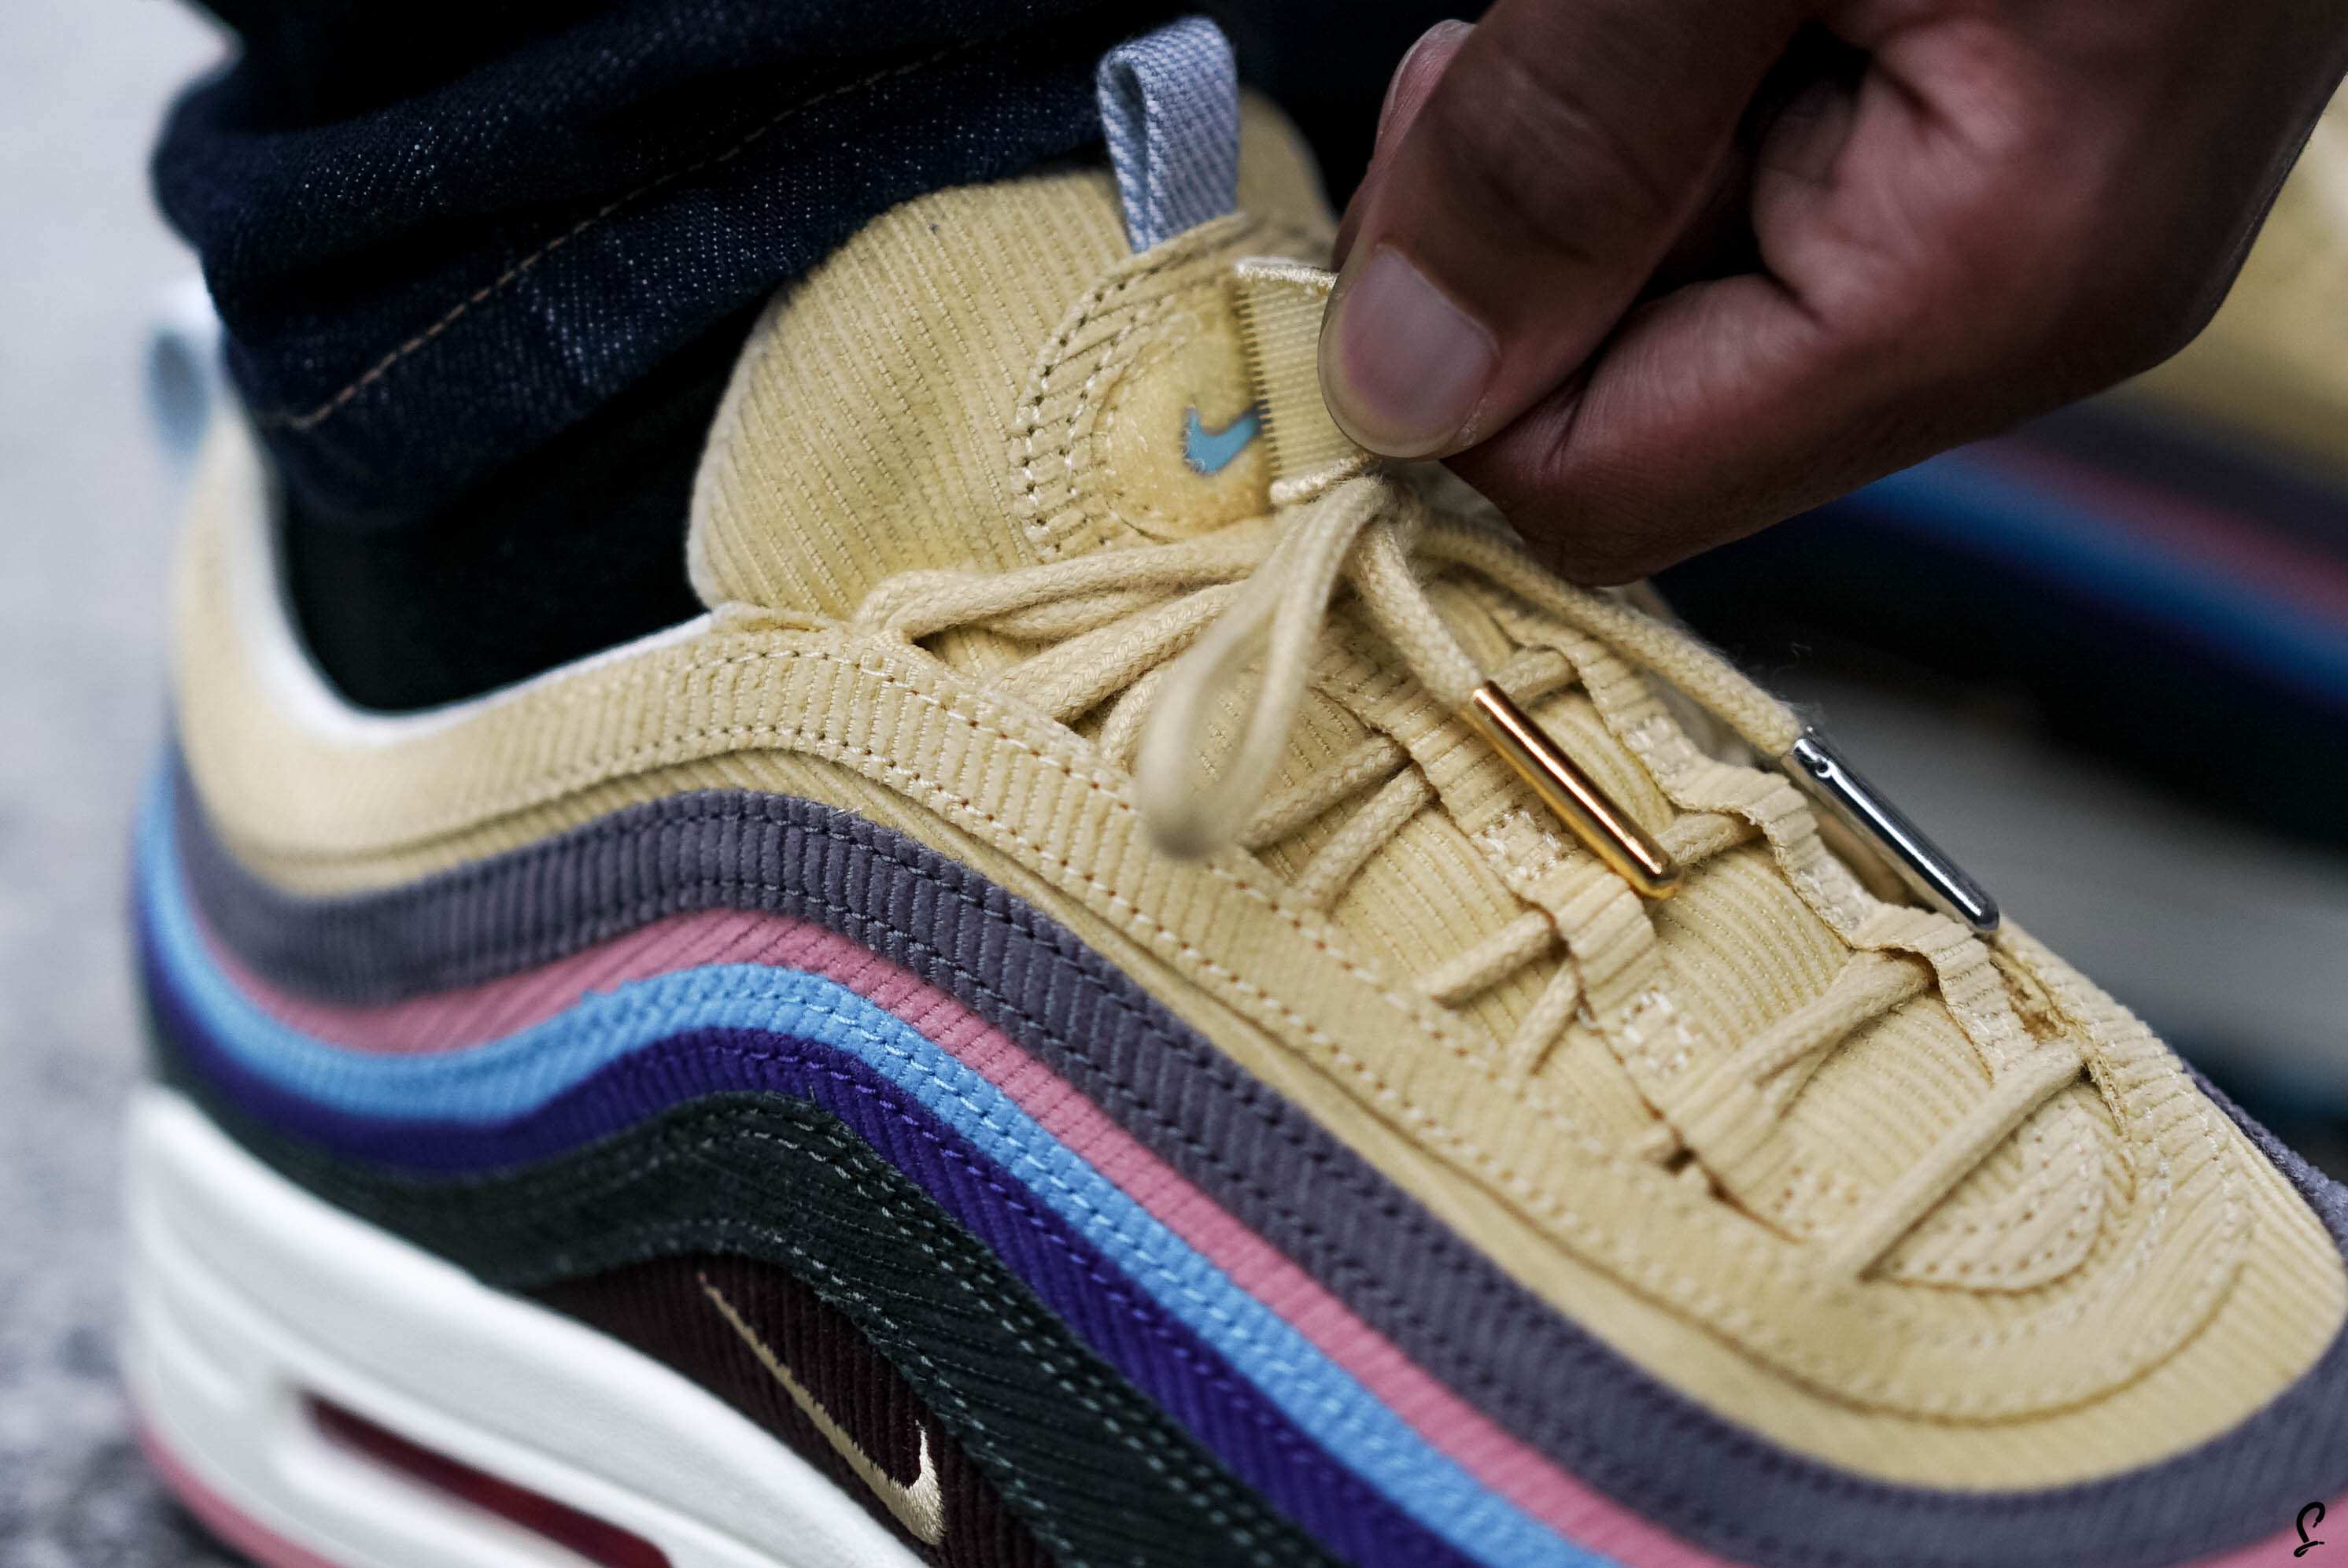 Sole Supplier on Twitter: if you a pair! guide coming for the Sean Wotherspoon x Air Max 97/1 https://t.co/fwLkA40Rpe https://t.co/EKTW0hipXR" / Twitter